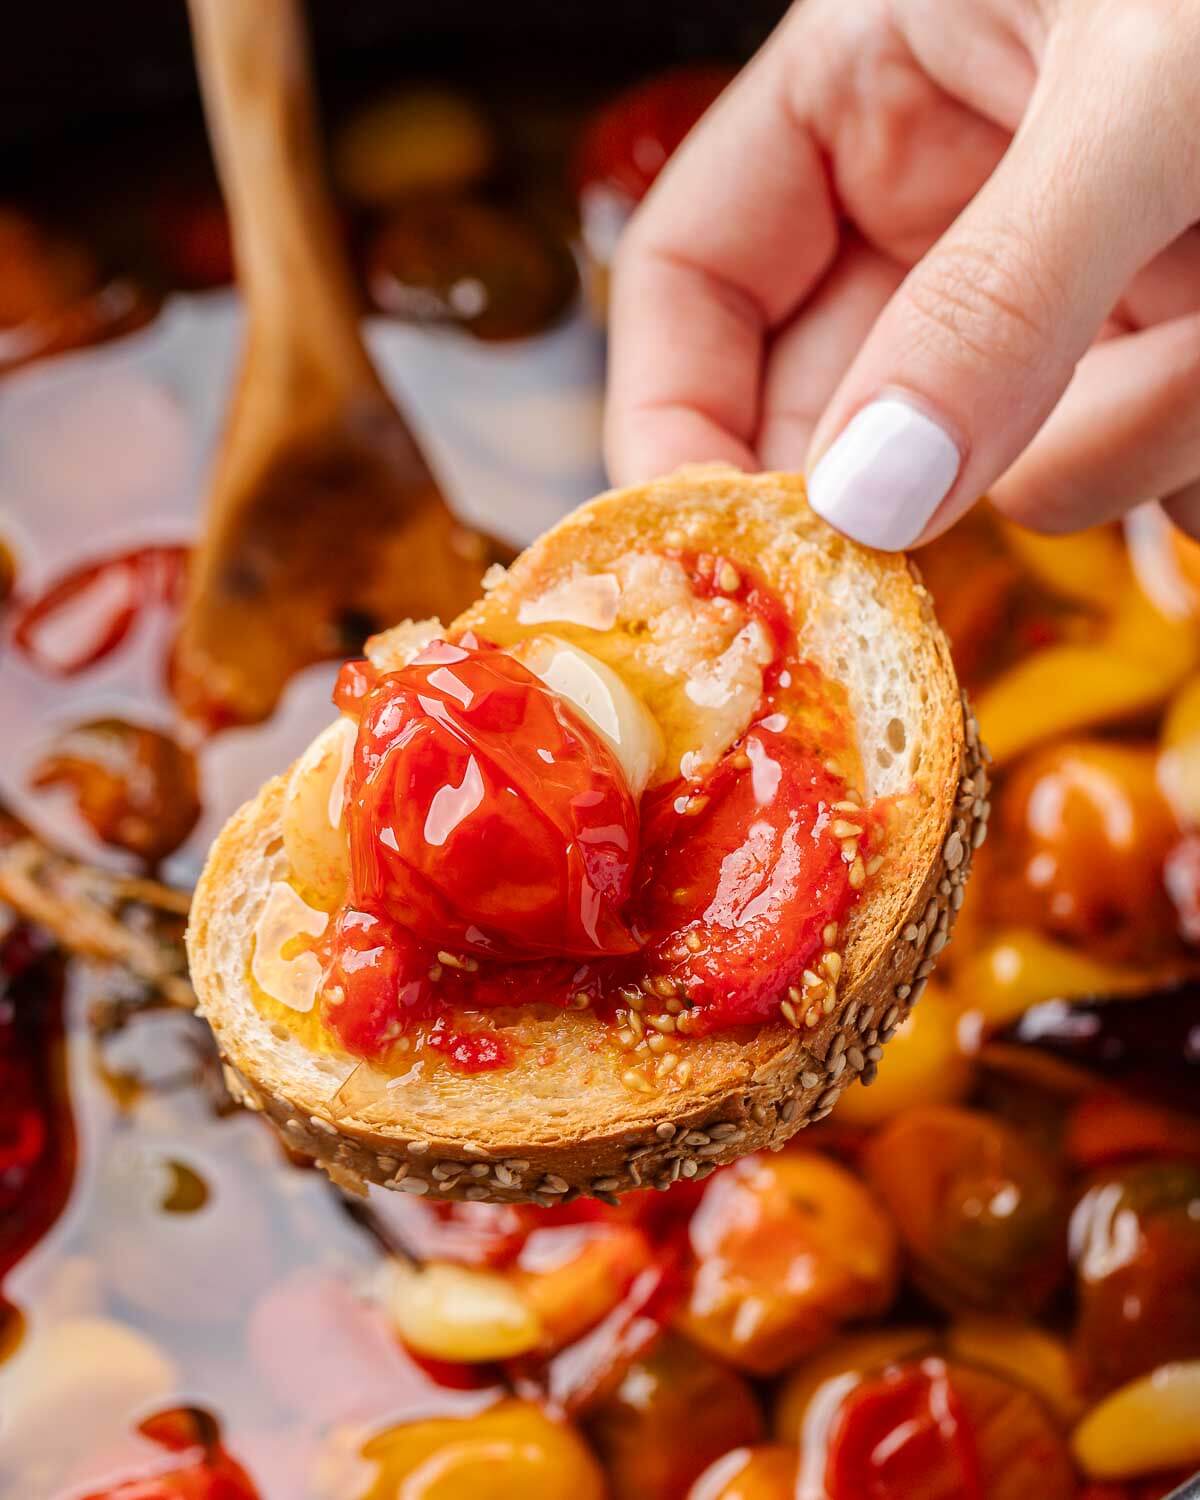 Hand holding piece of bread with tomato confit.